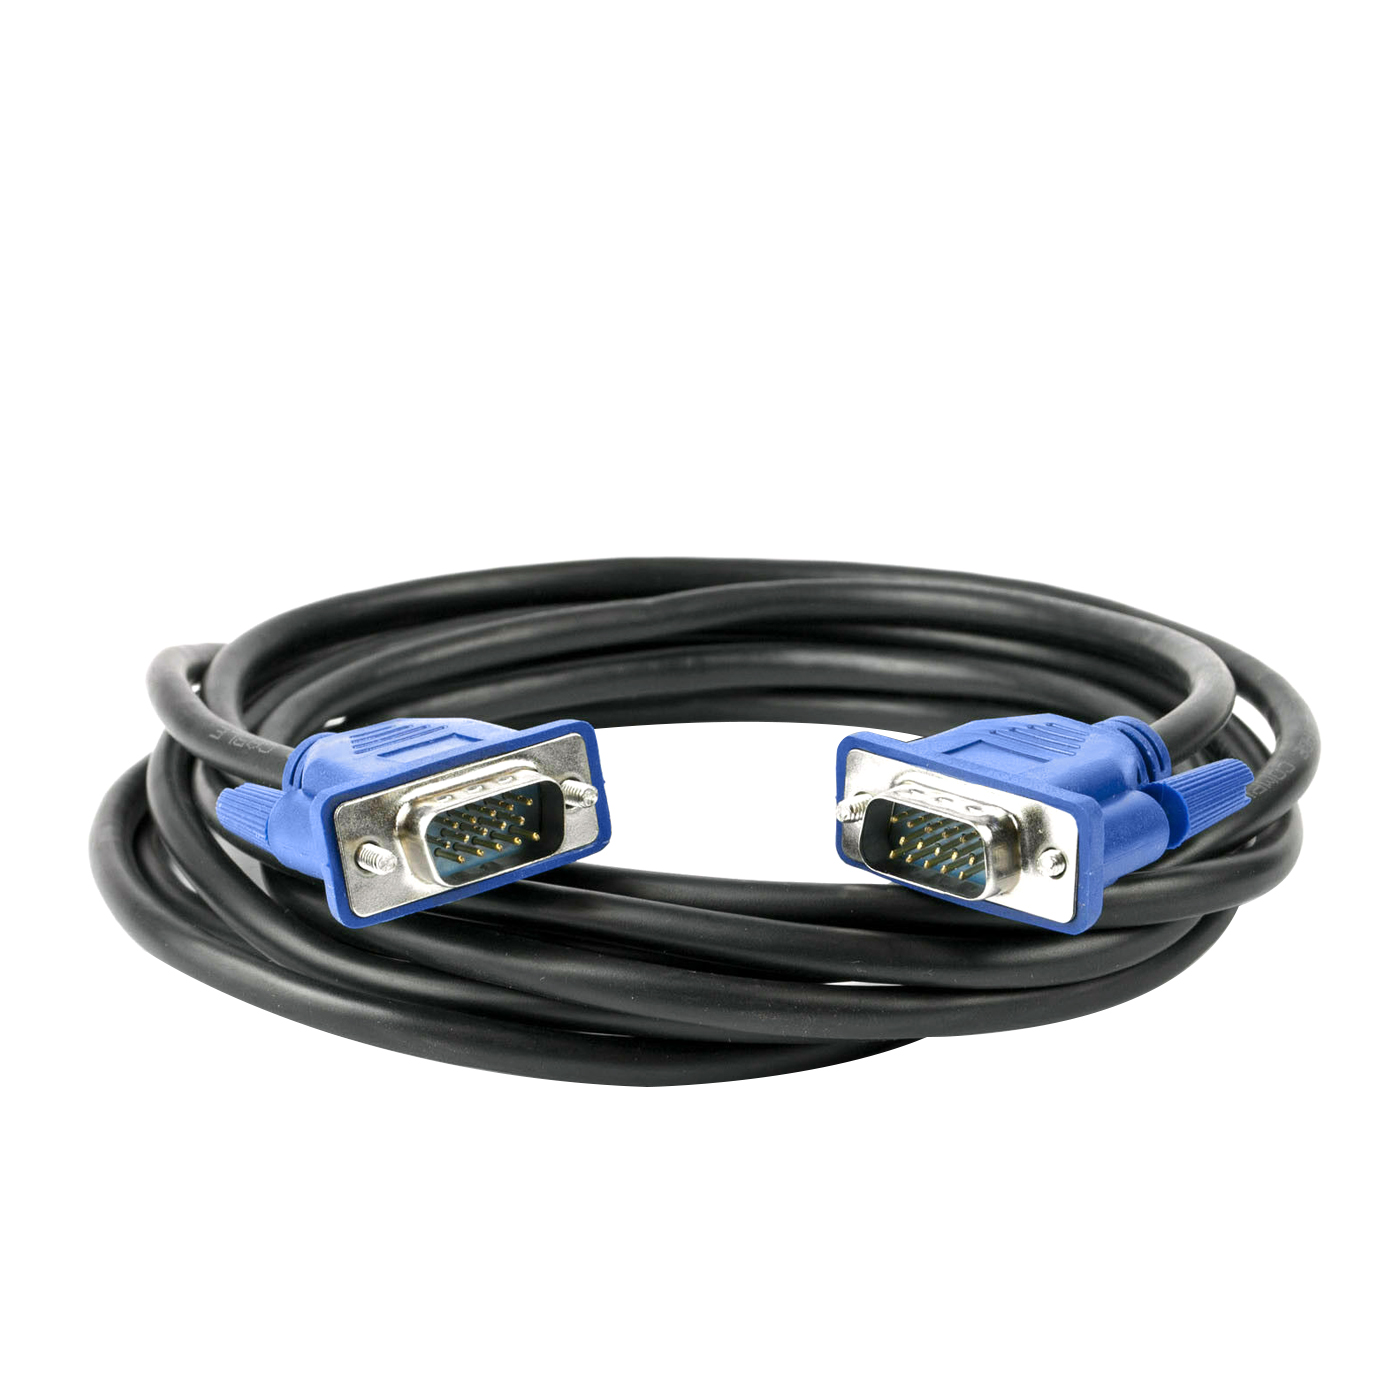 HEGUANGWEI 3m Normal Quality VGA 15Pin Male to VGA 15Pin Female Cable for CRT Monitor VGA Series 